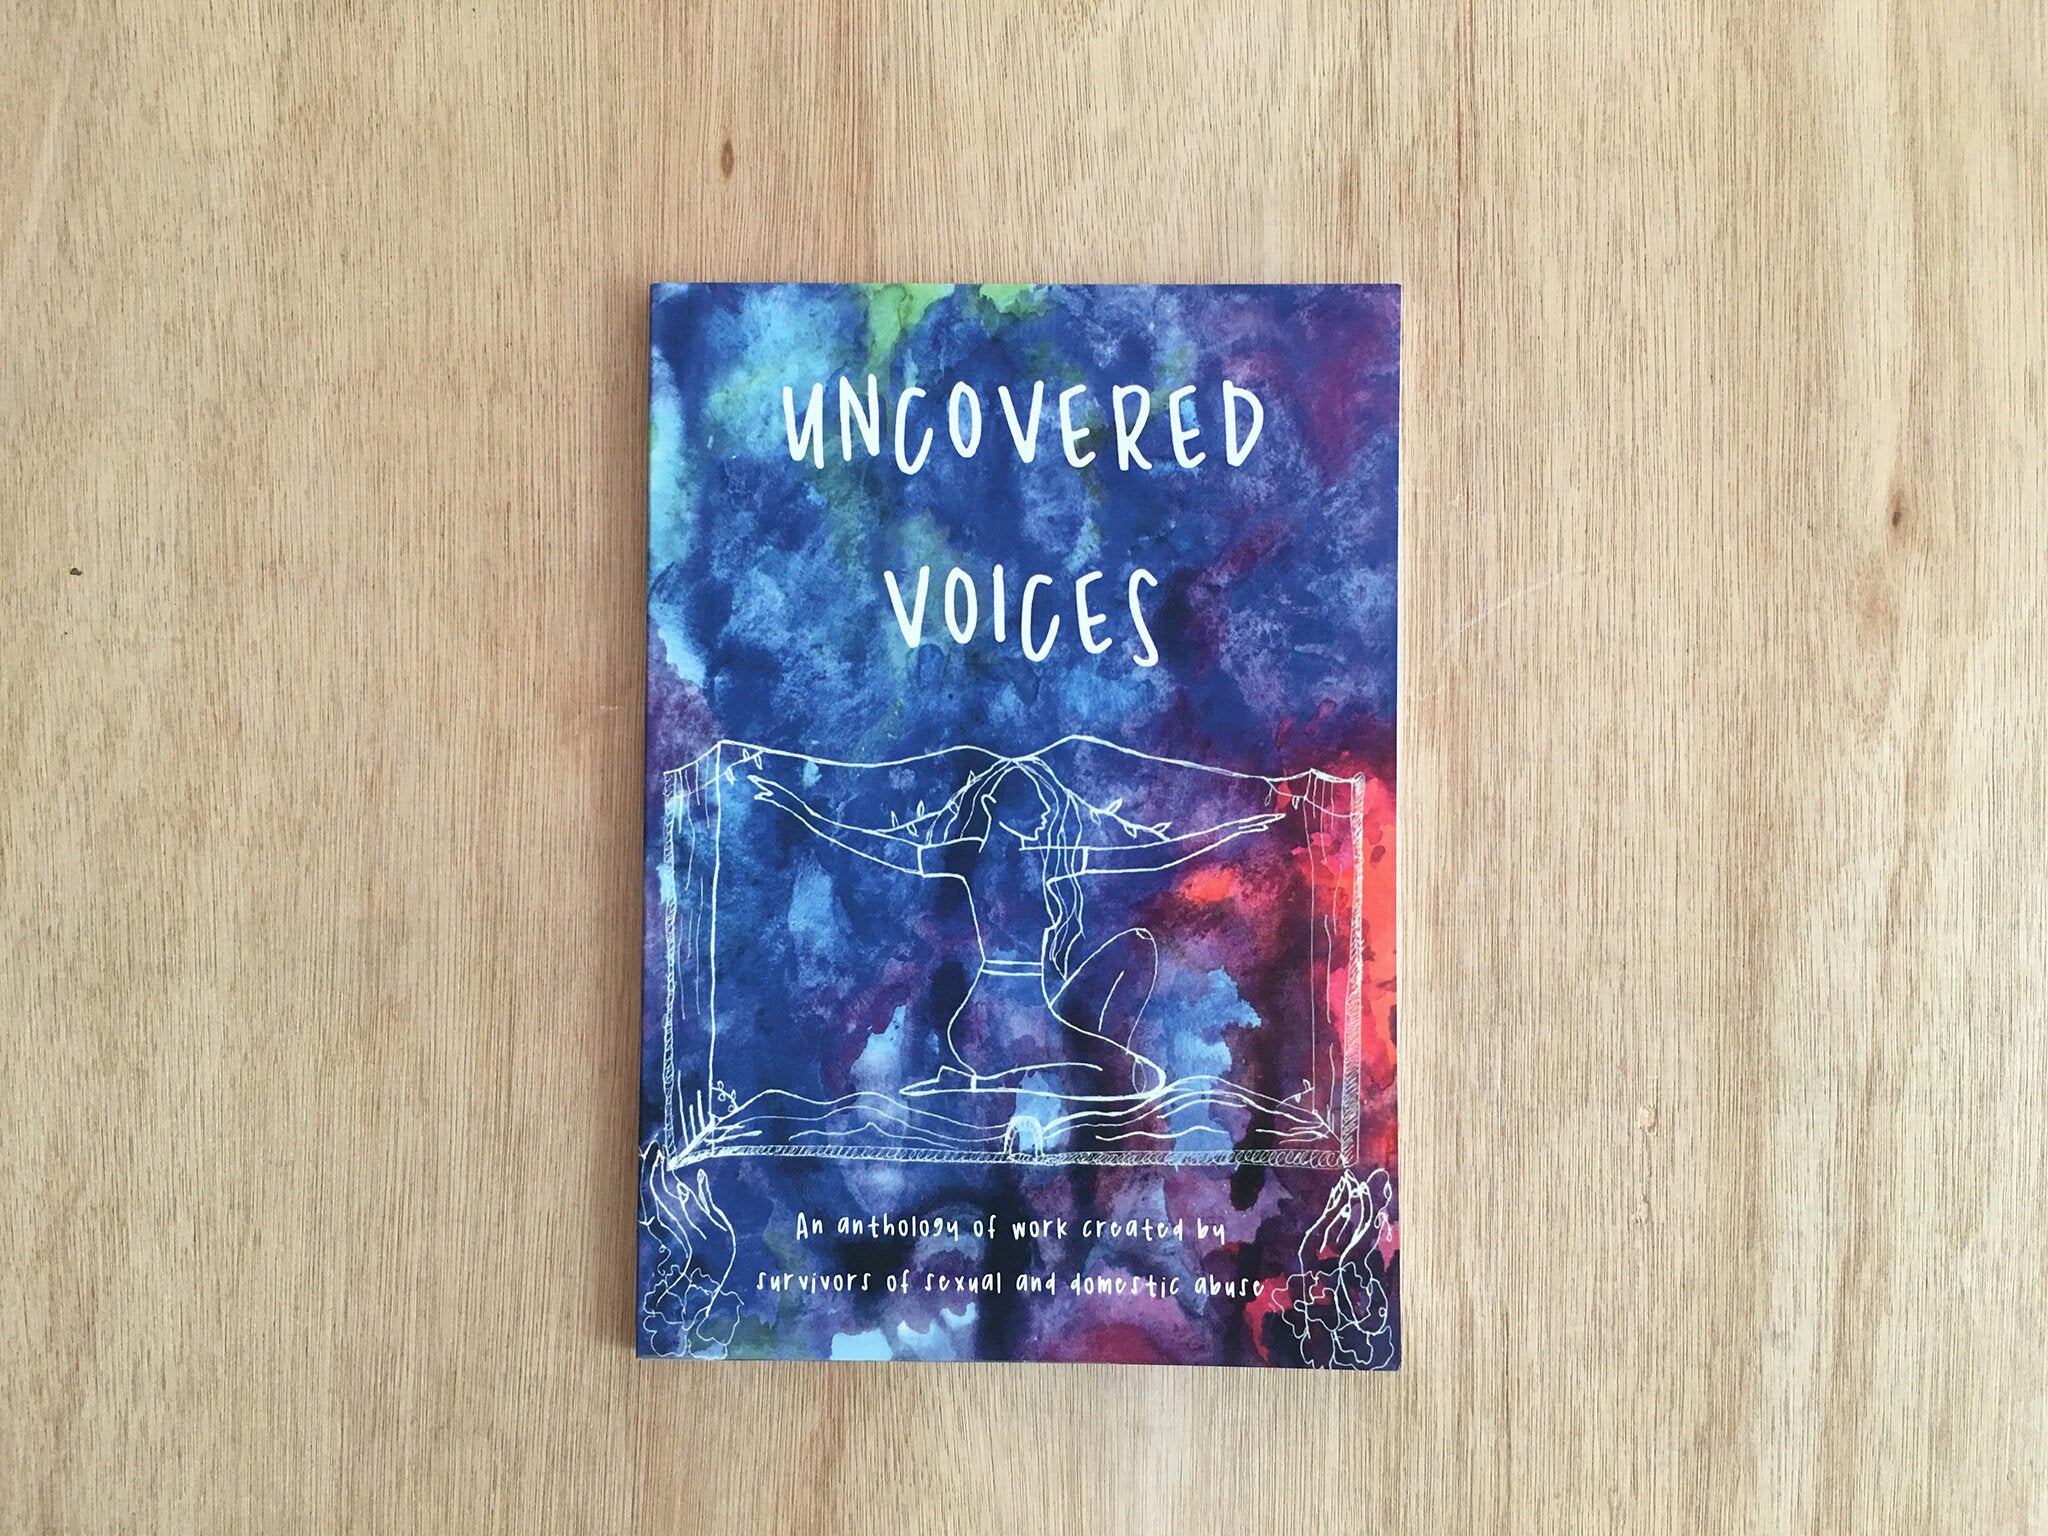 UNCOVERED VOICES by Various Artists